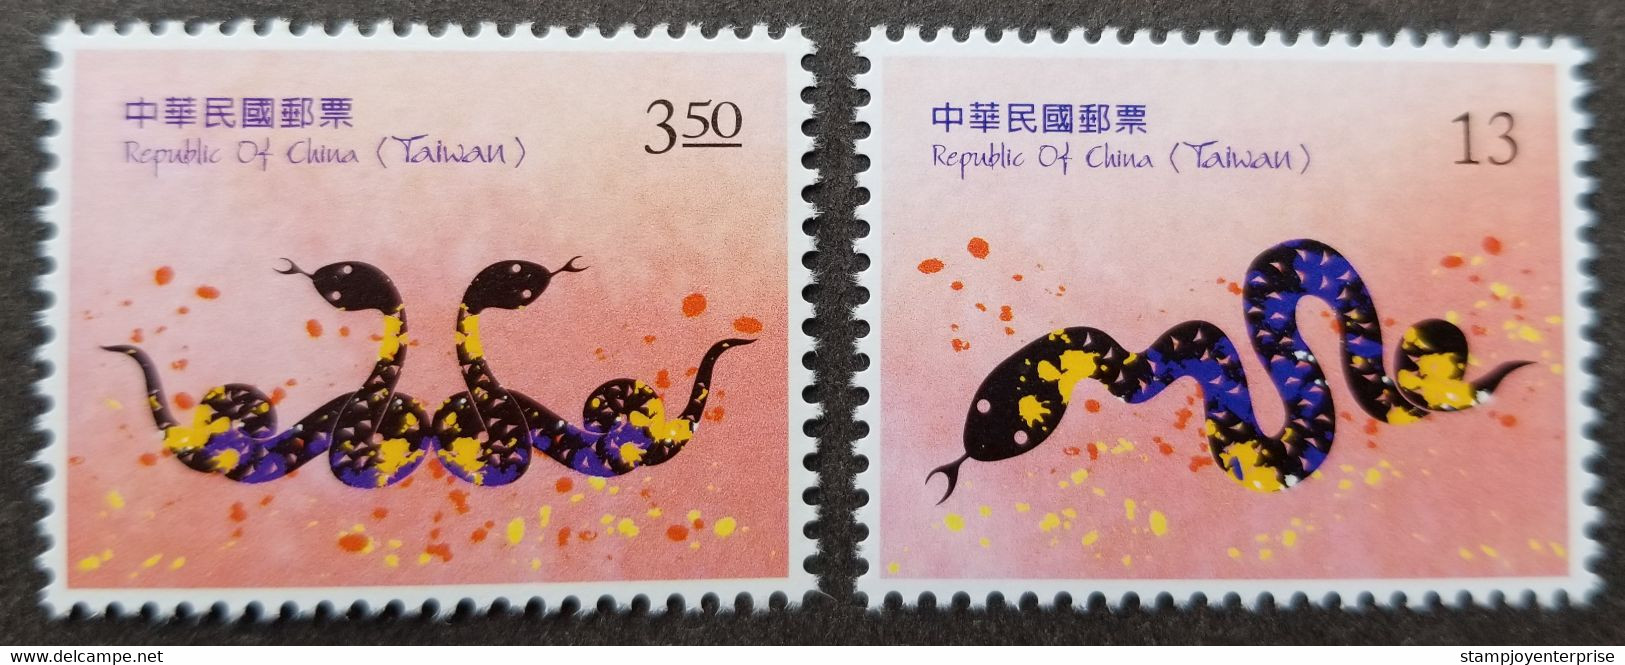 Taiwan New Year's Greeting Lunar Snake 2012 Chinese Zodiac Reptile (stamp) MNH - Unused Stamps